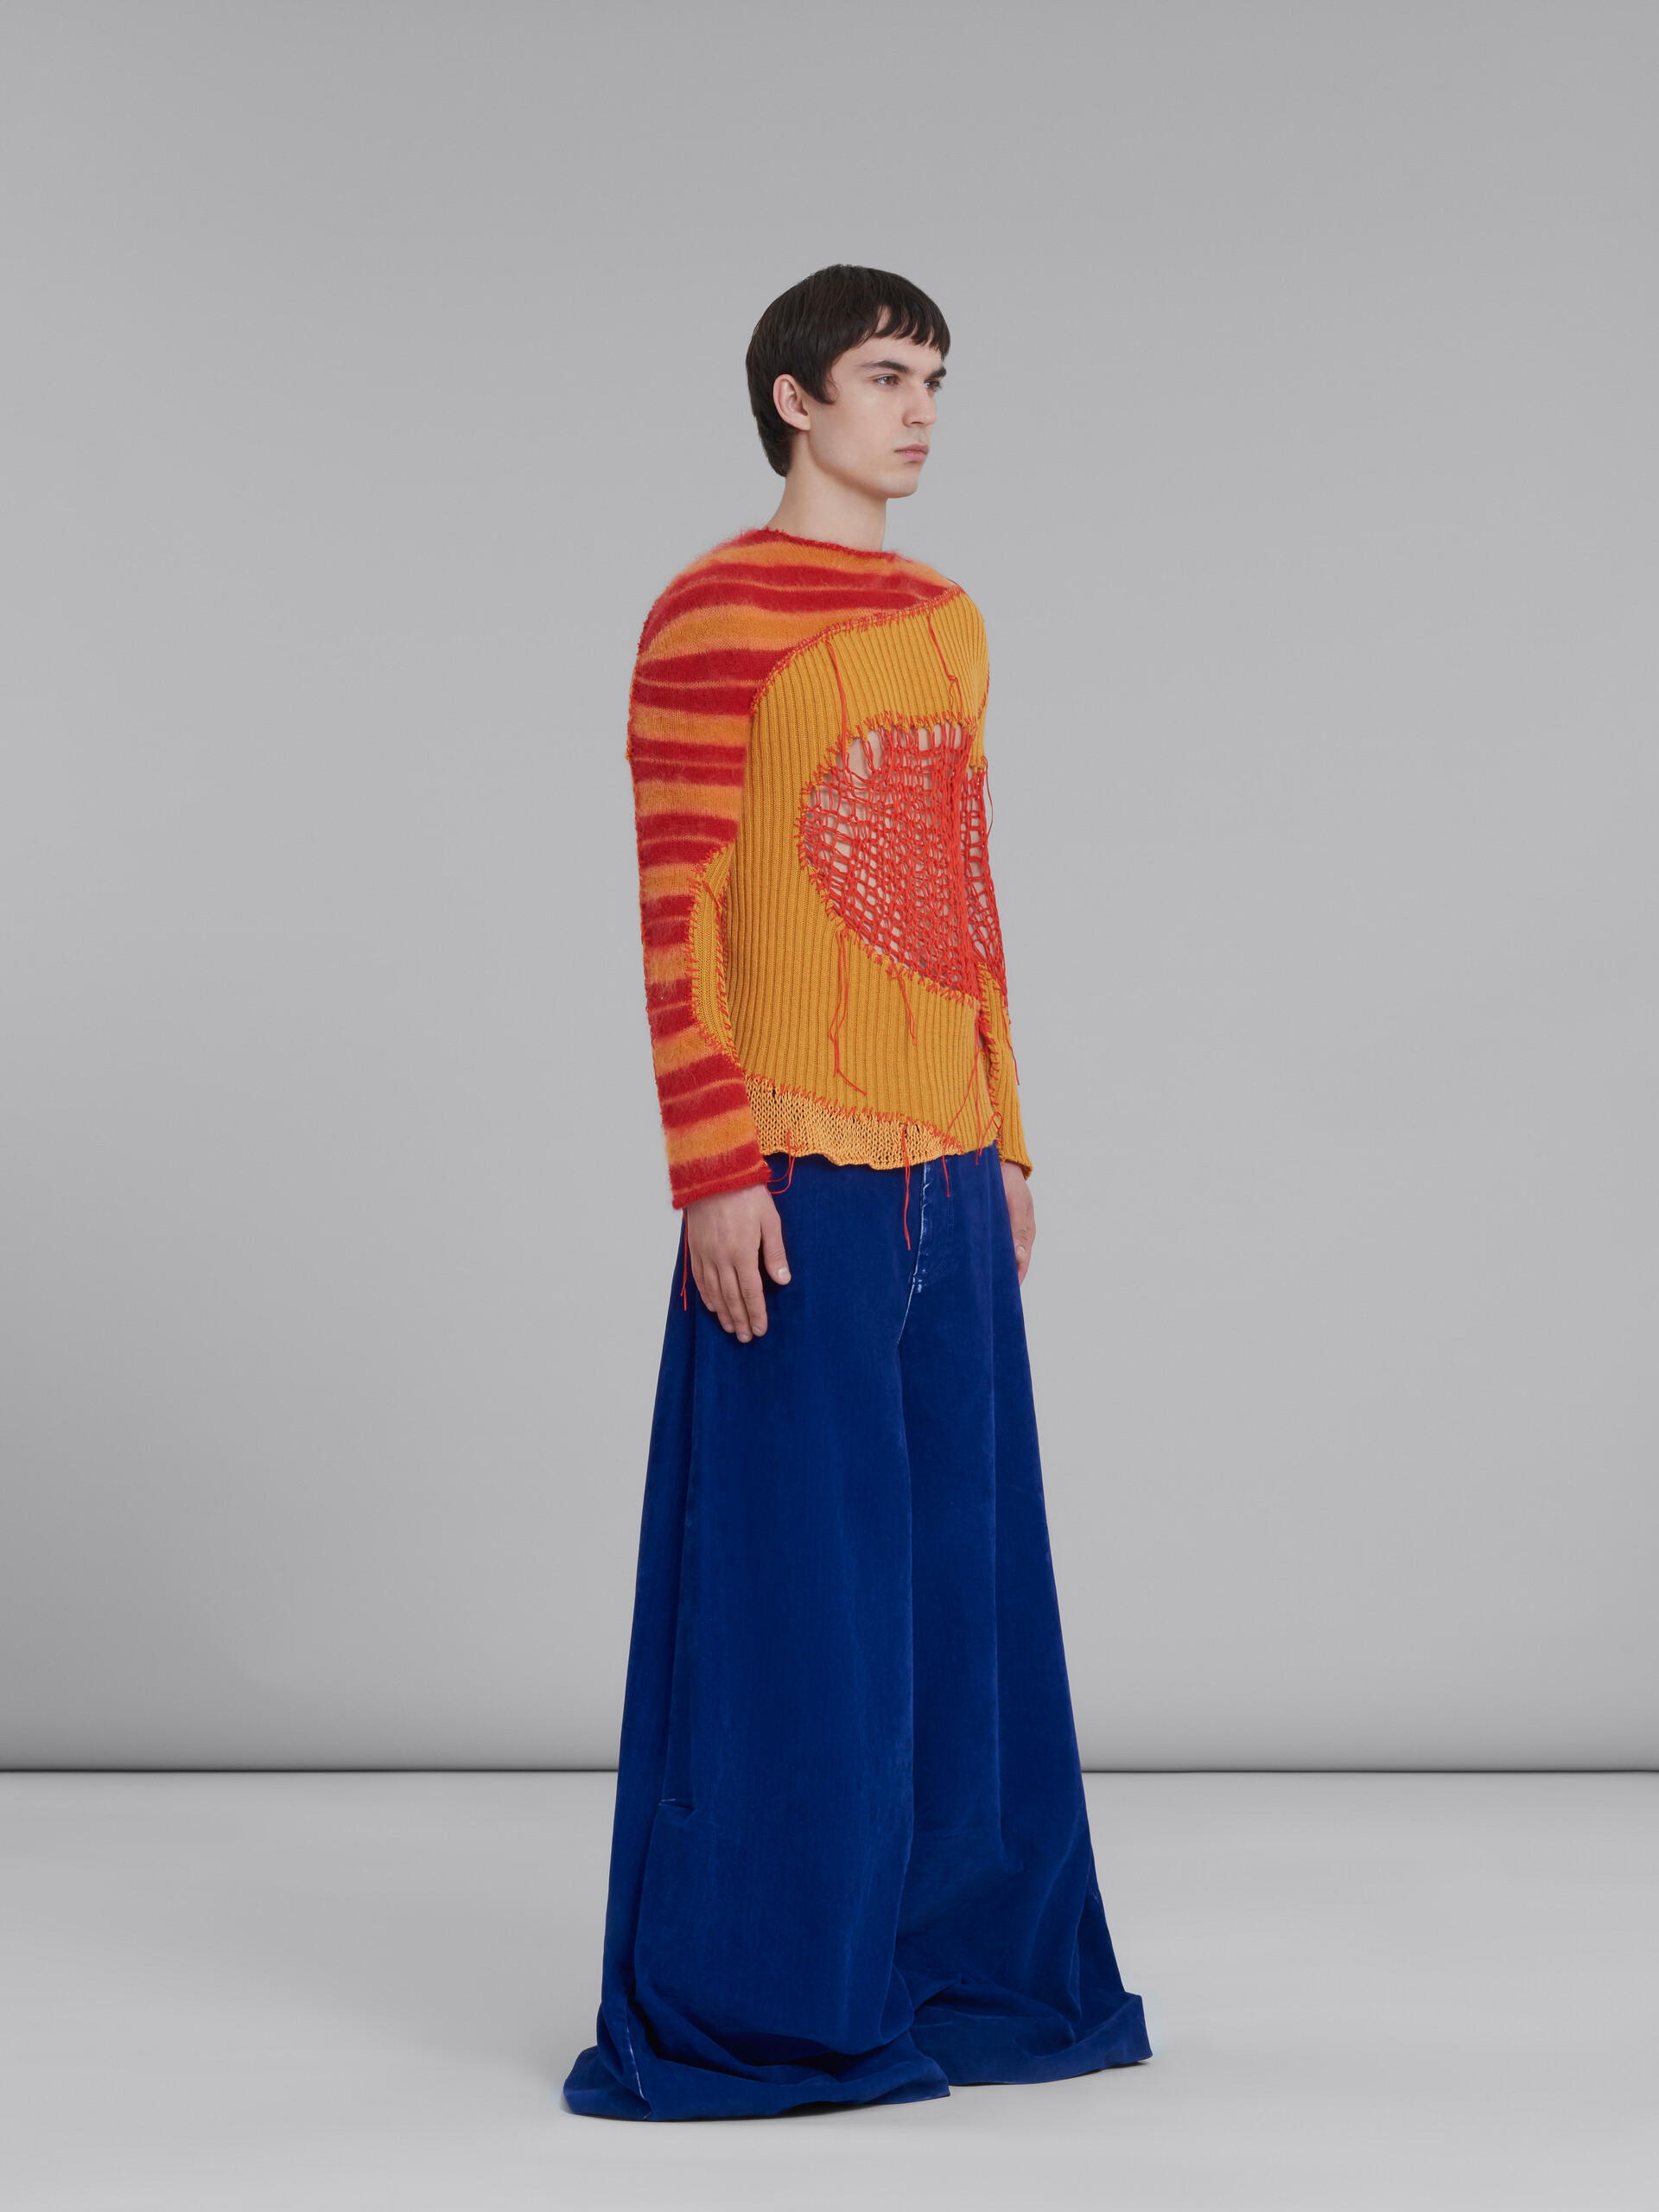 Red and orange patchwork jumper - Pullovers - Image 4